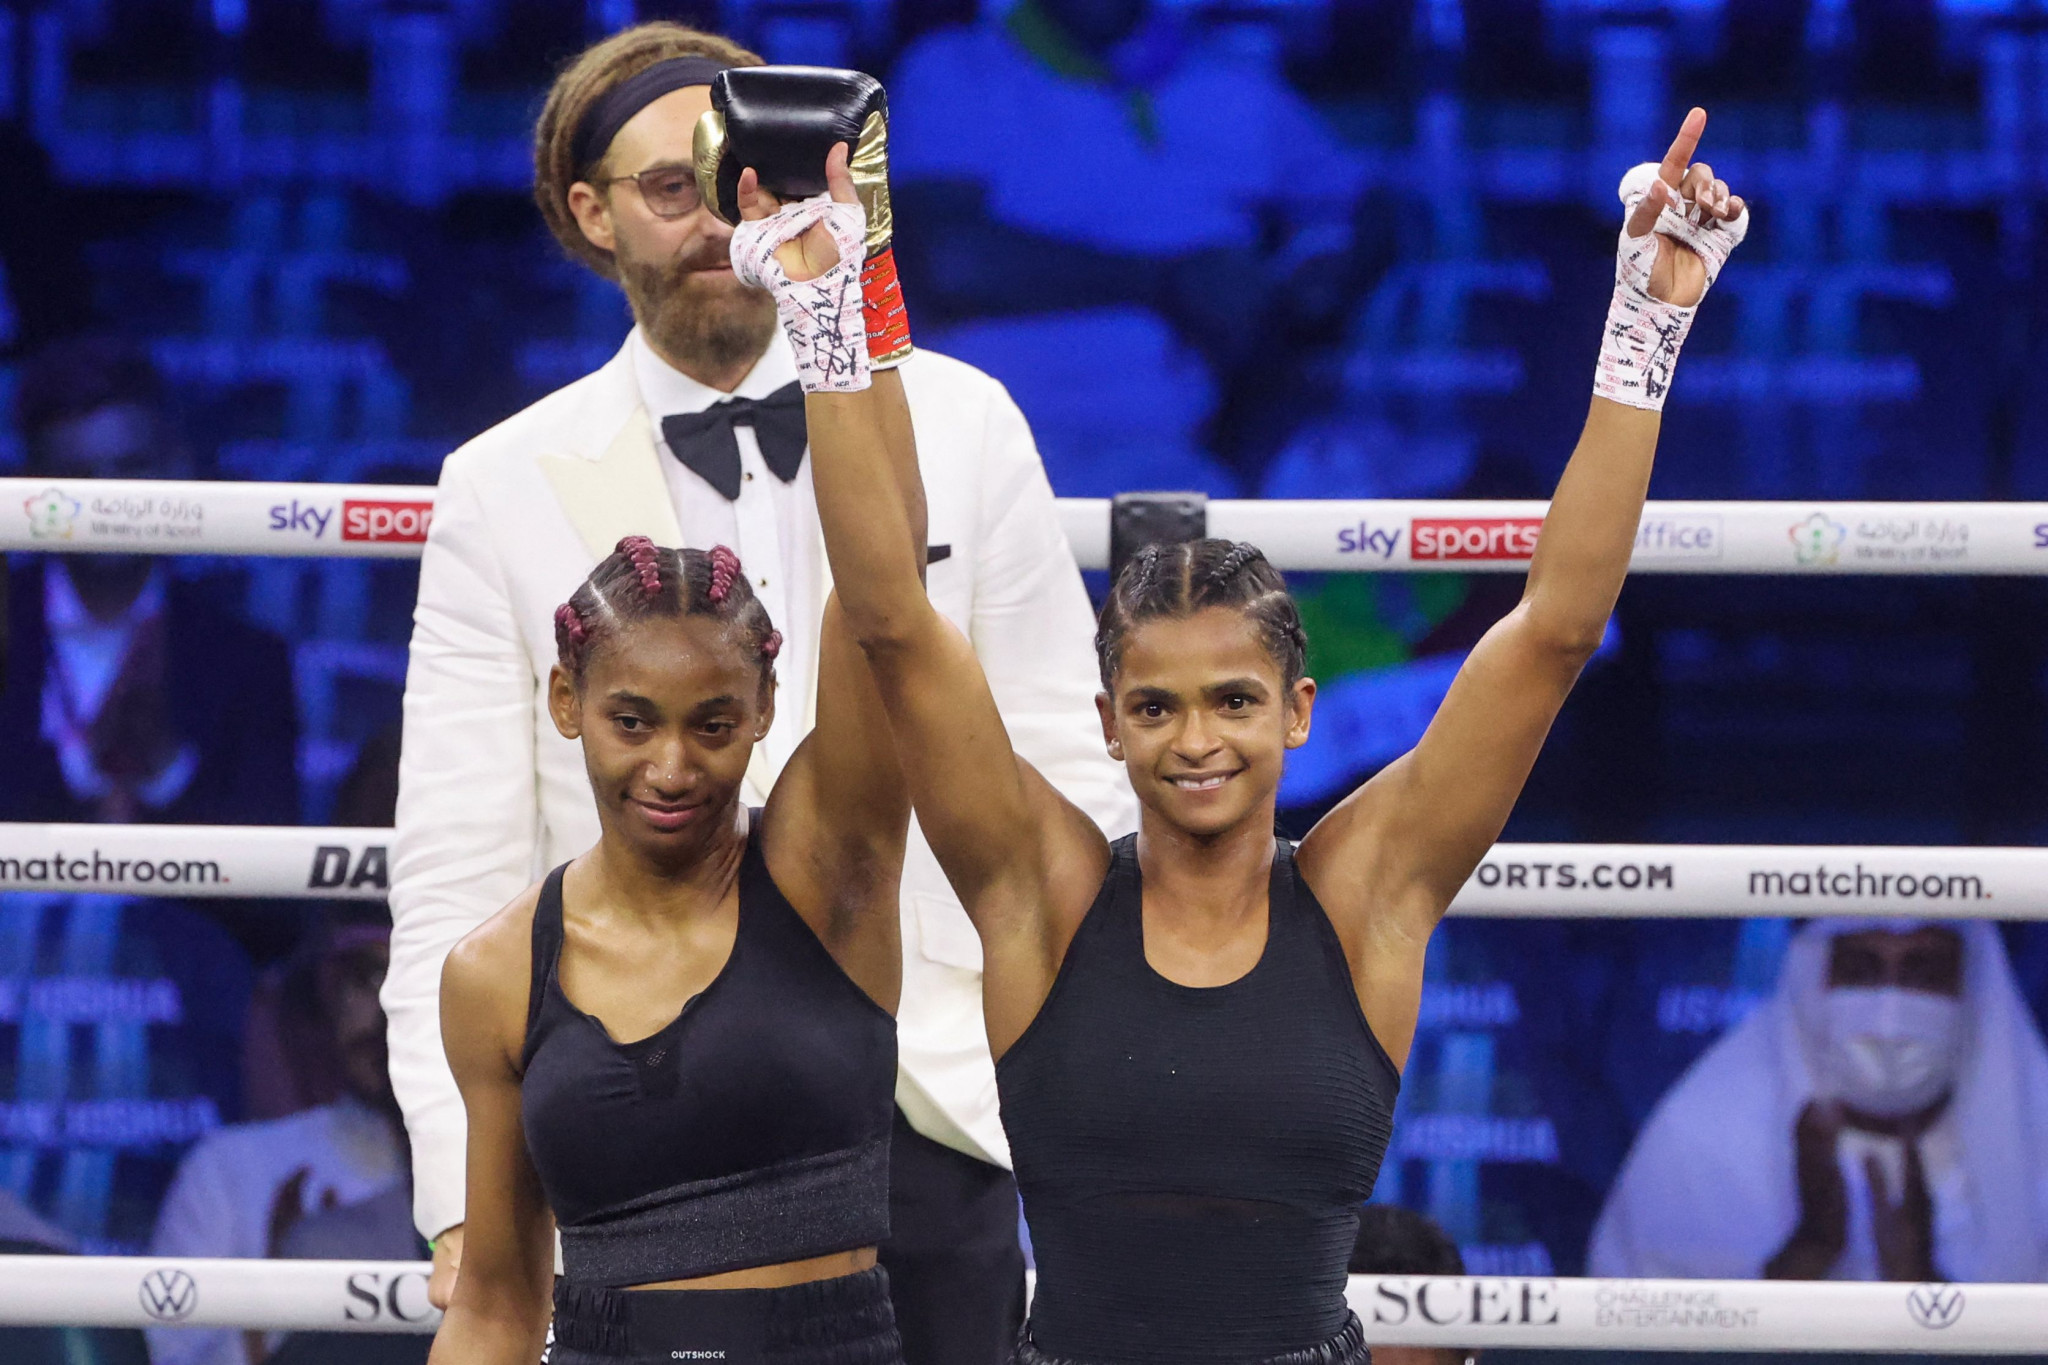 Women's boxing has become big in Saudi Arabia since the country staged its first professional women's fight in August 2022 ©Getty Images